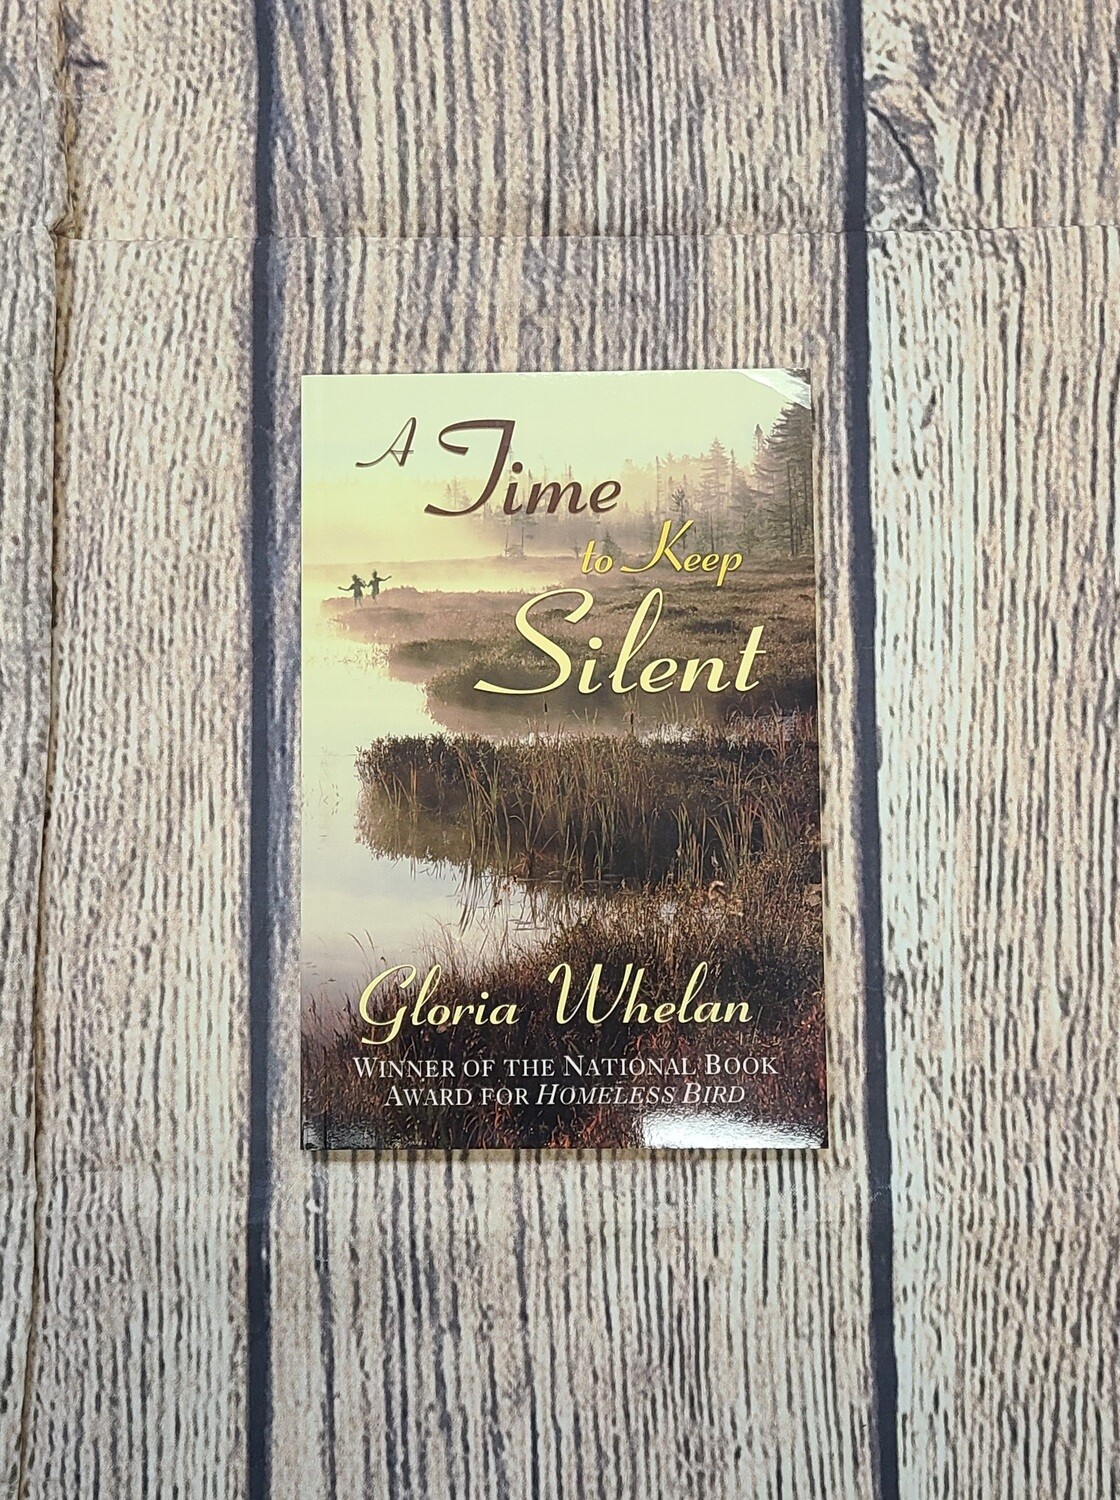 A Time to Keep Silent by Gloria Whelan